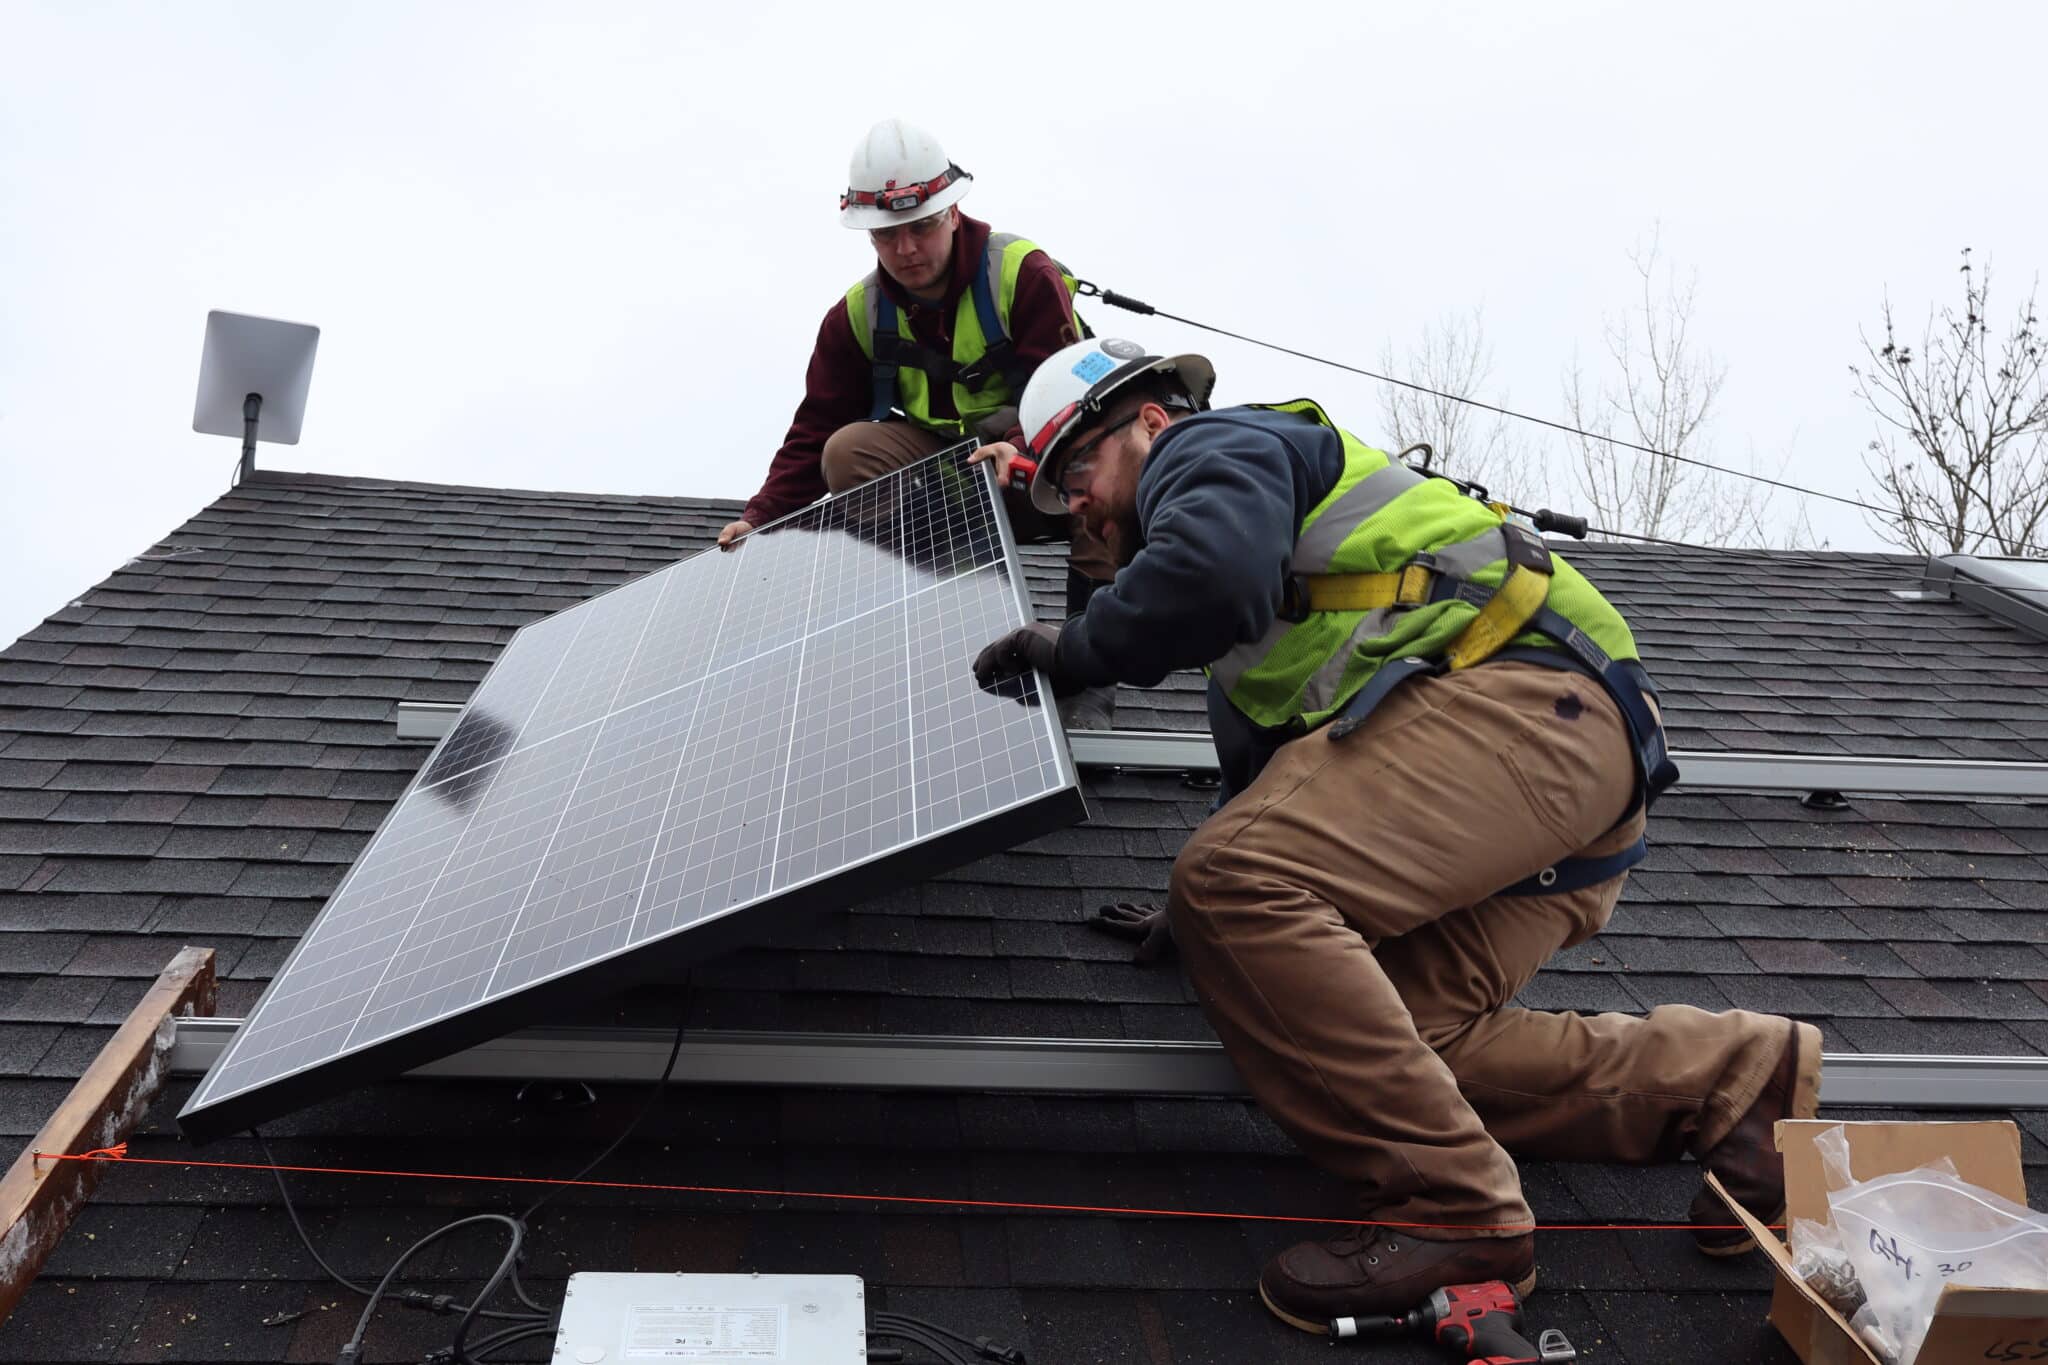 residential electricians in high vis and protective gear installing a solar panel on a gray shingle roof